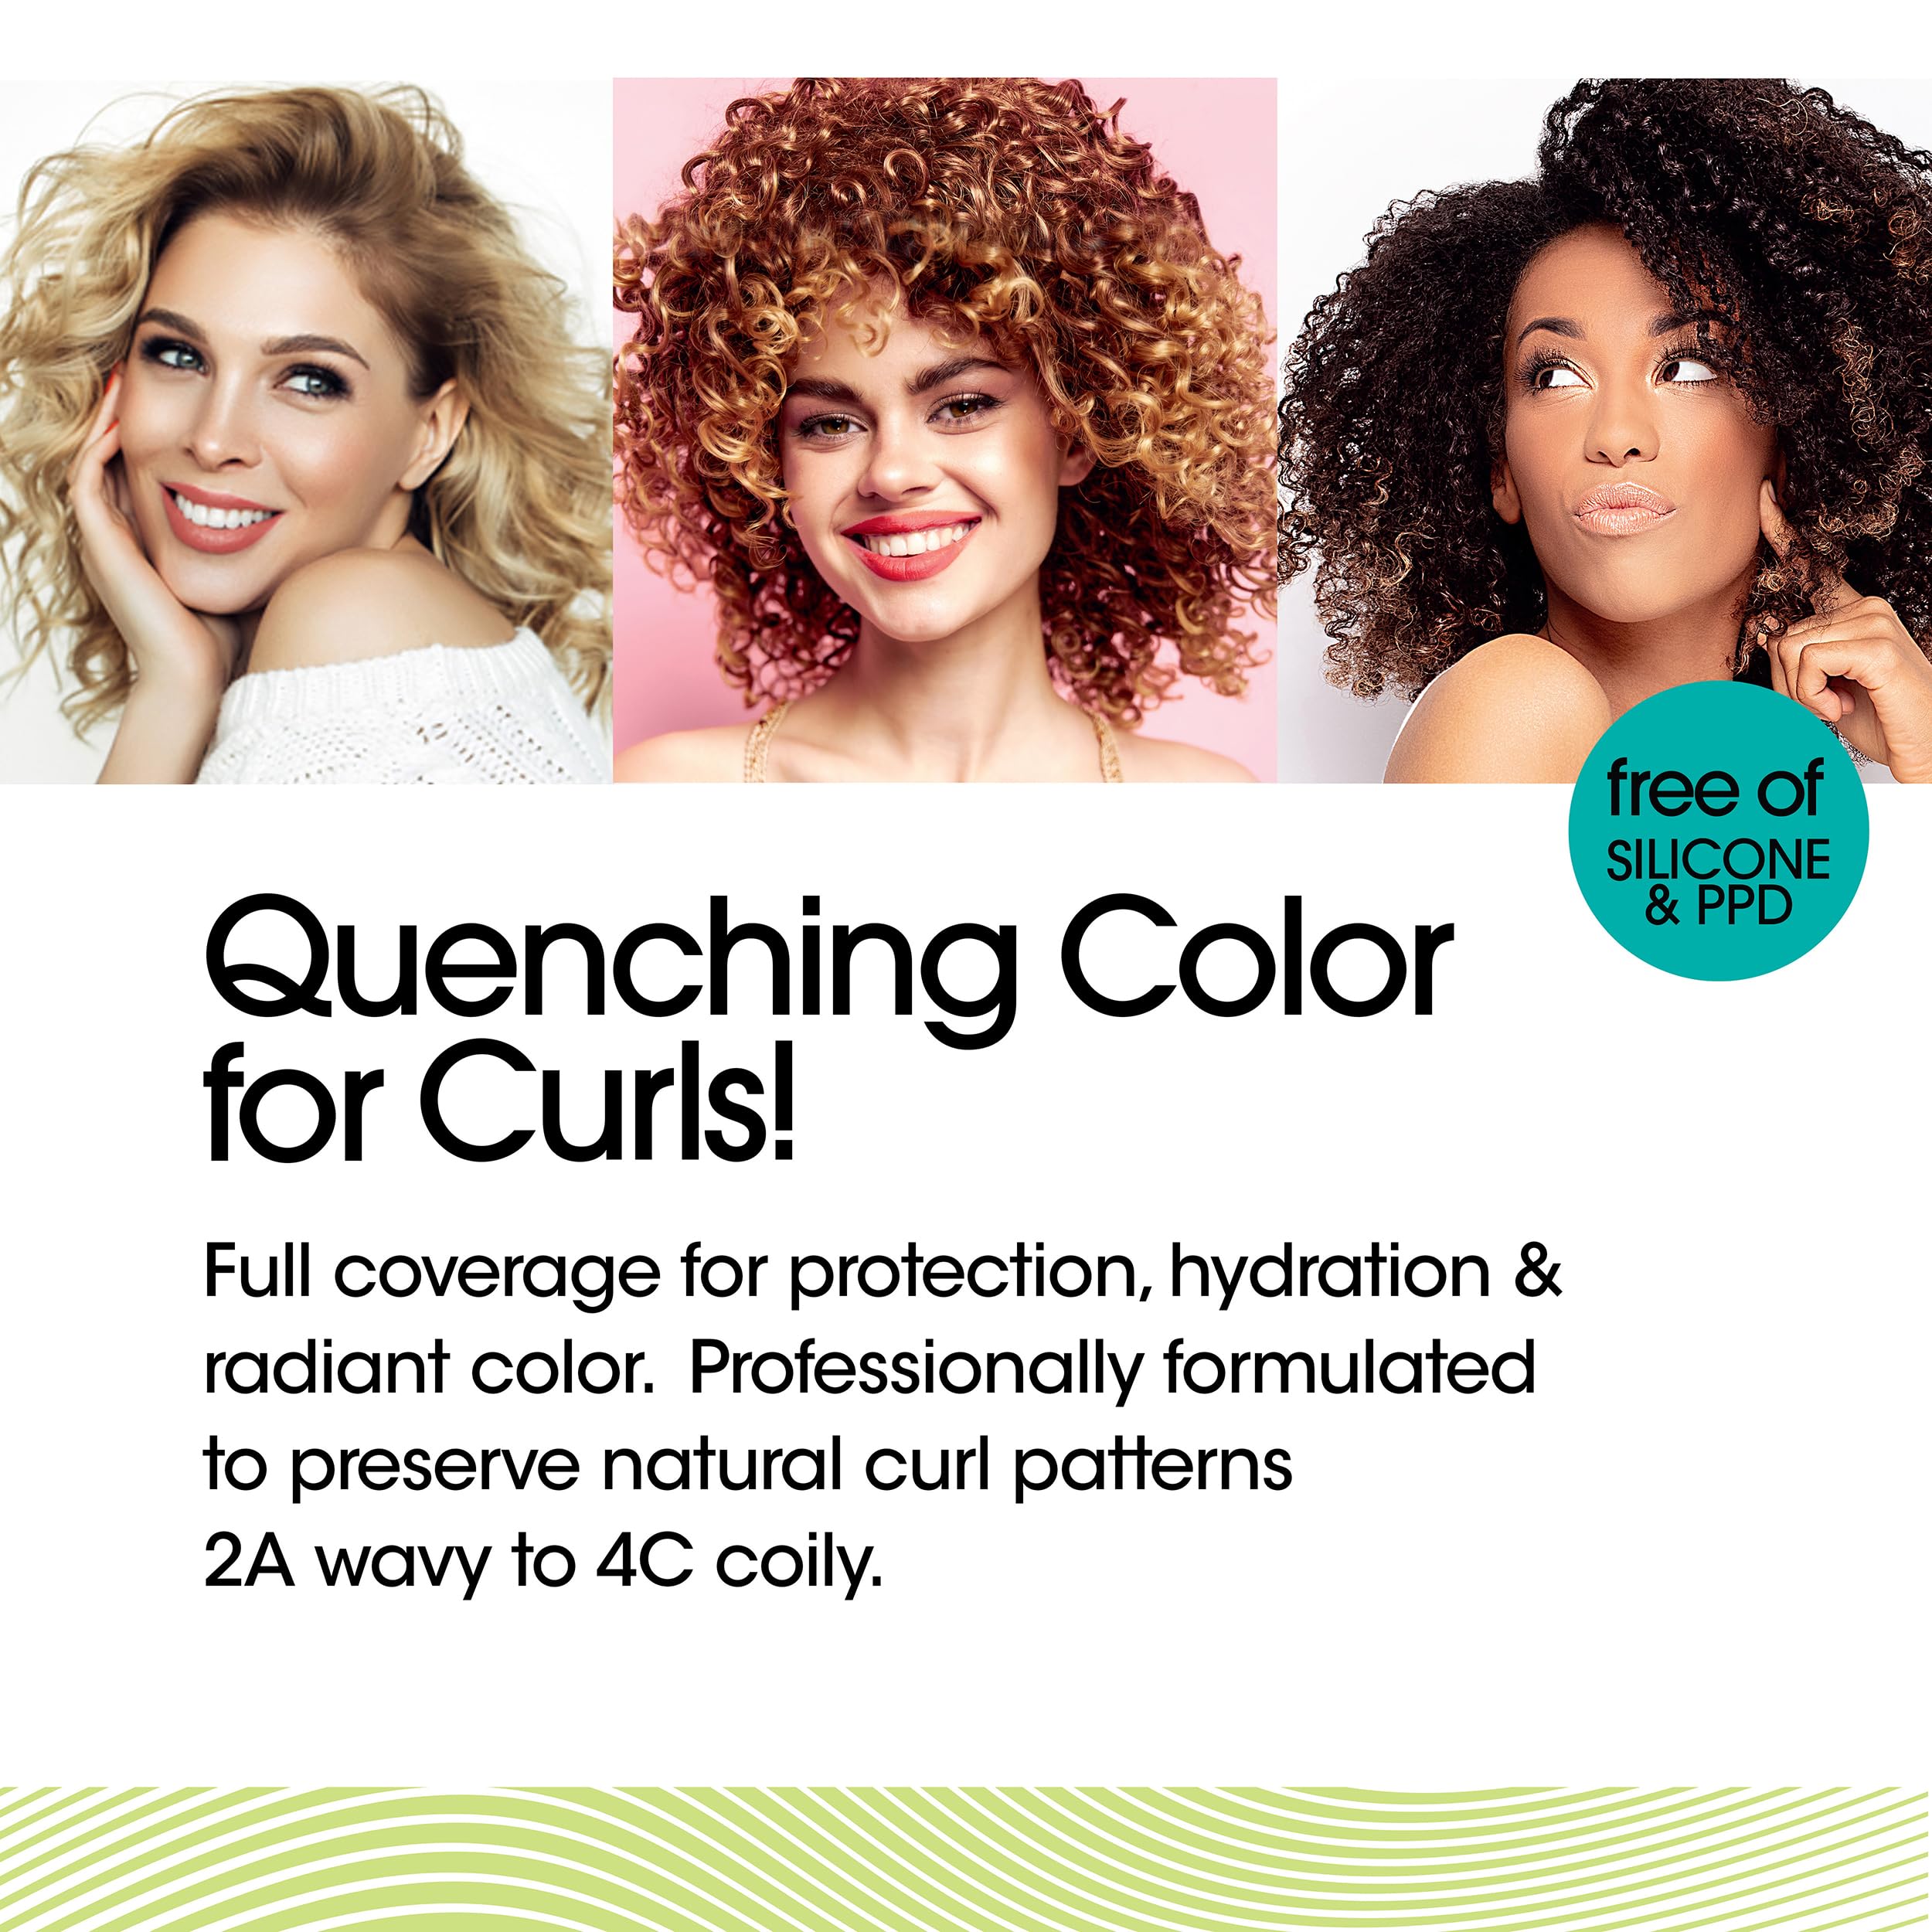 All About Curls 5N Caramel Curls (Medium Brown - Golden Undertone) Permanent Hair Color (Prep + Protect Serum & Hair Dye for Curly Hair) - 100% Grey Coverage, Nourished & Radiant Curls